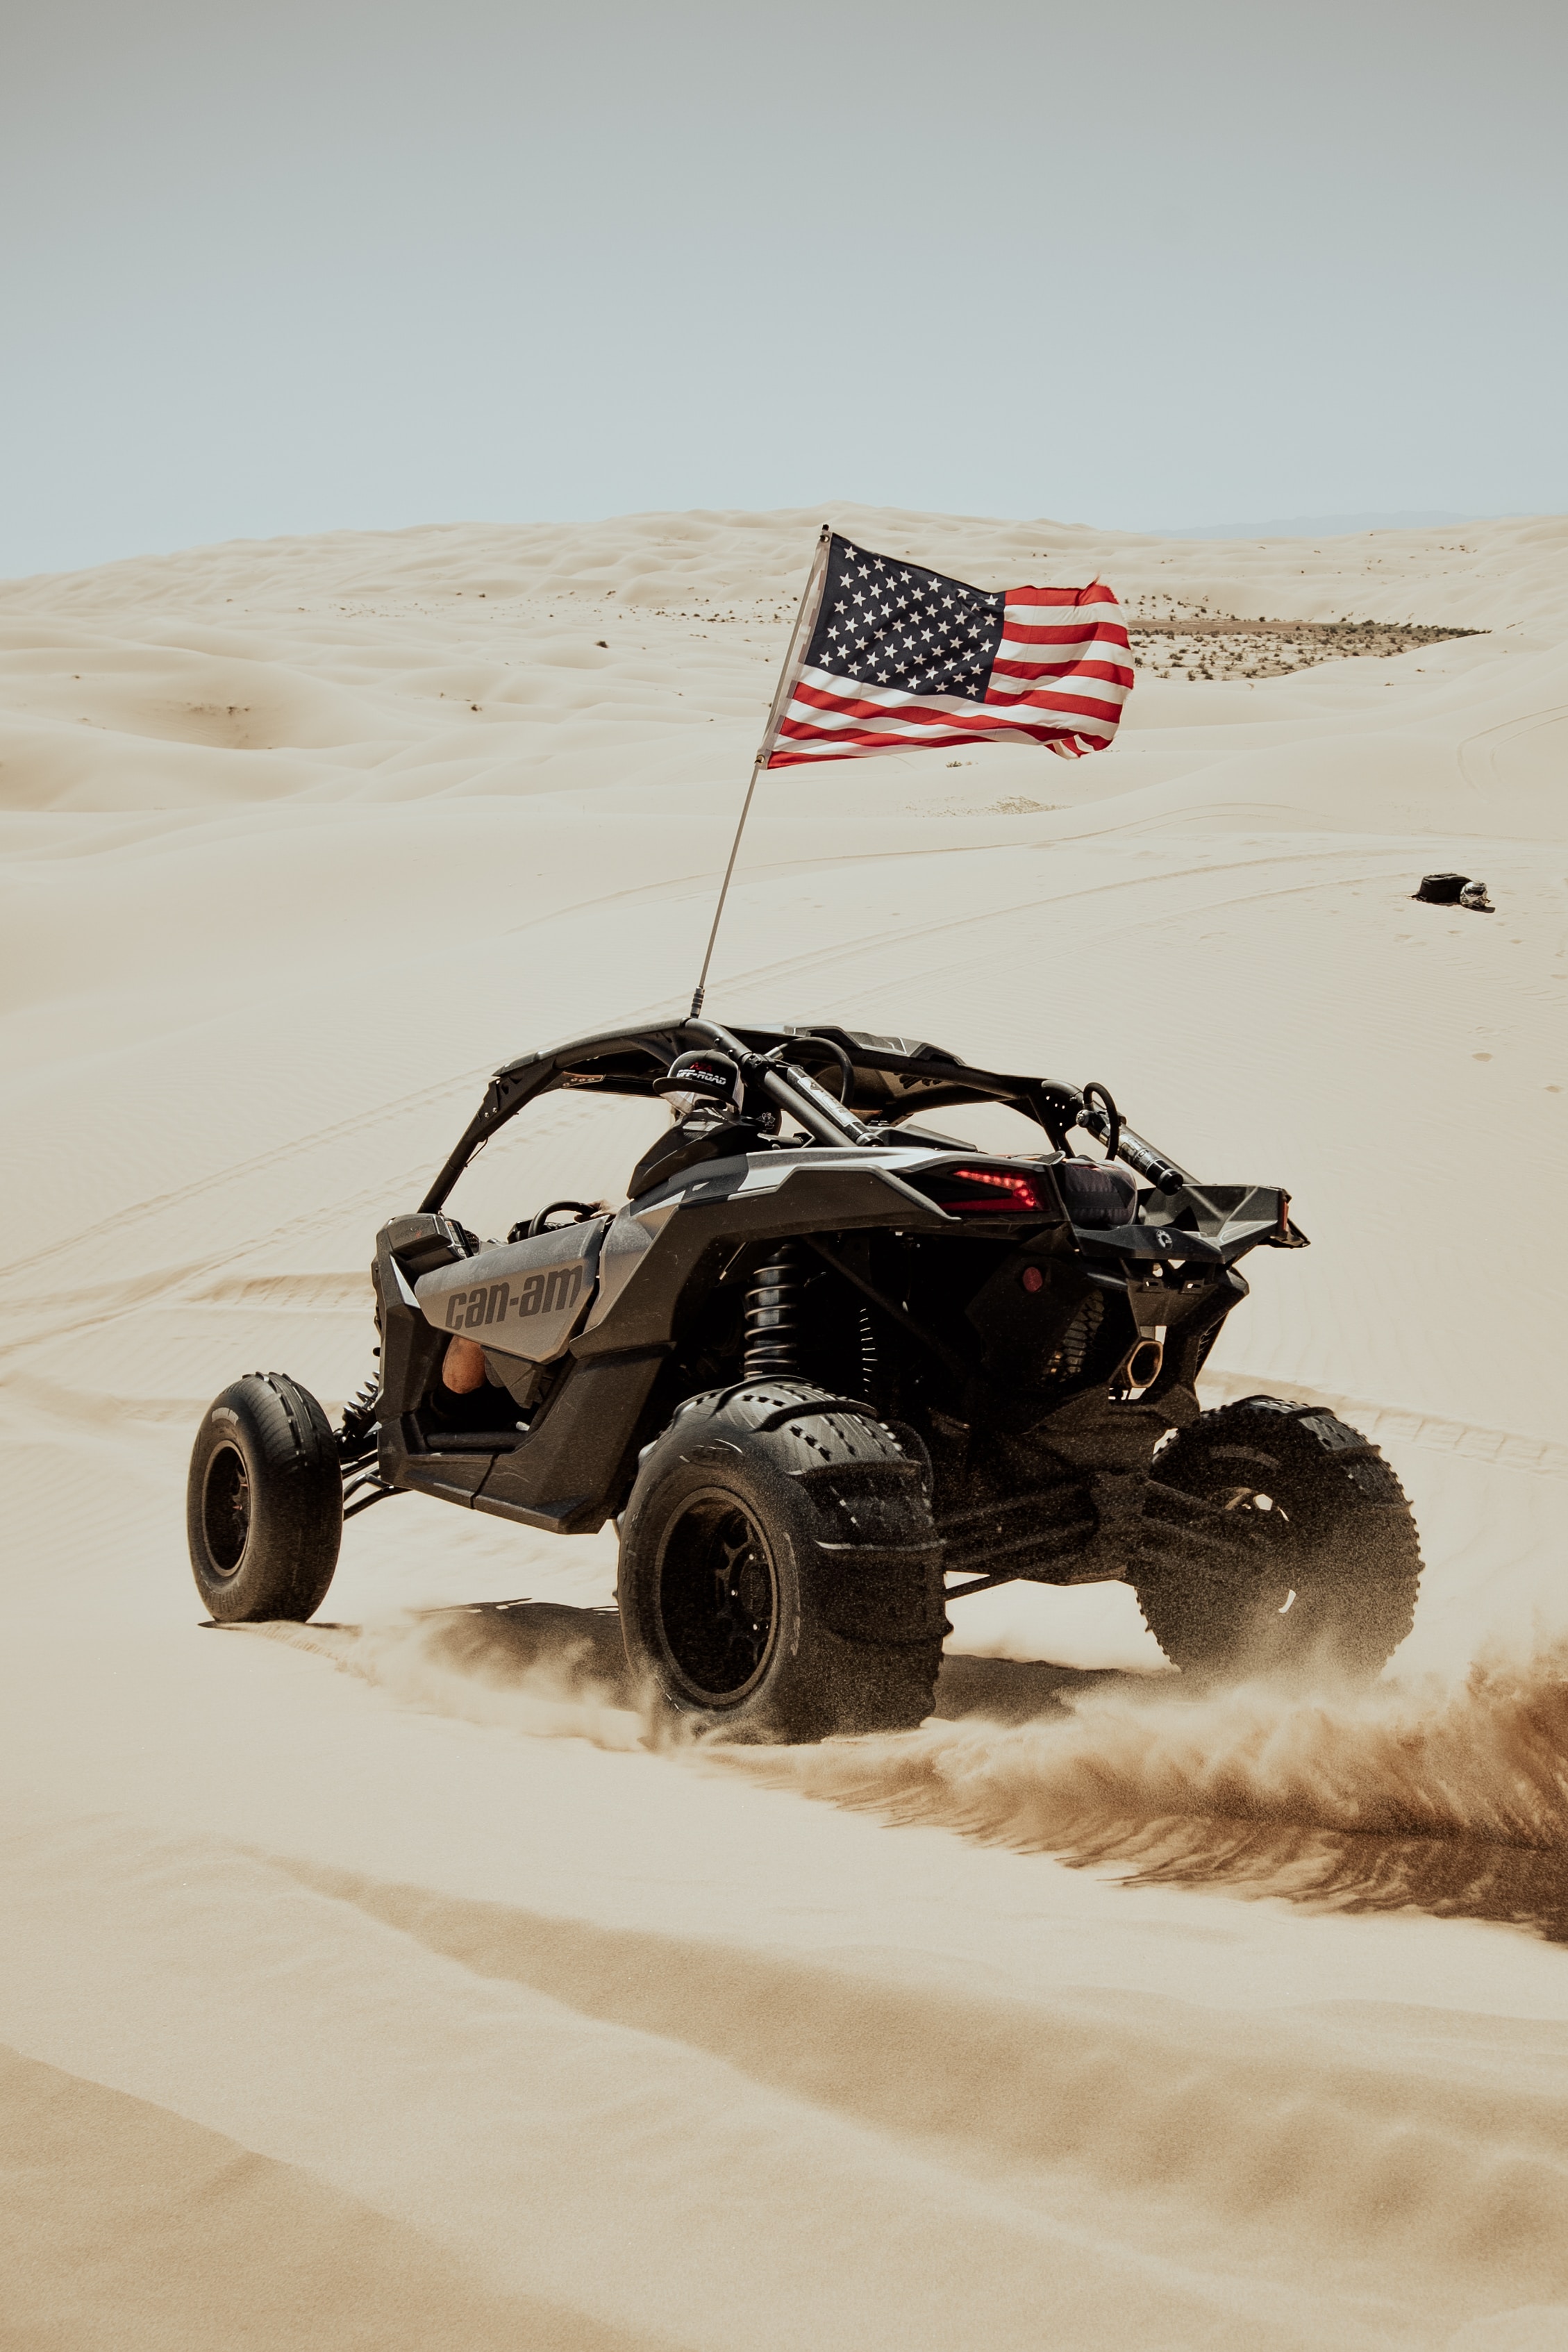 General 2258x3387 buggy vehicle desert offroad American flag flag dust daylight portrait display can am sand